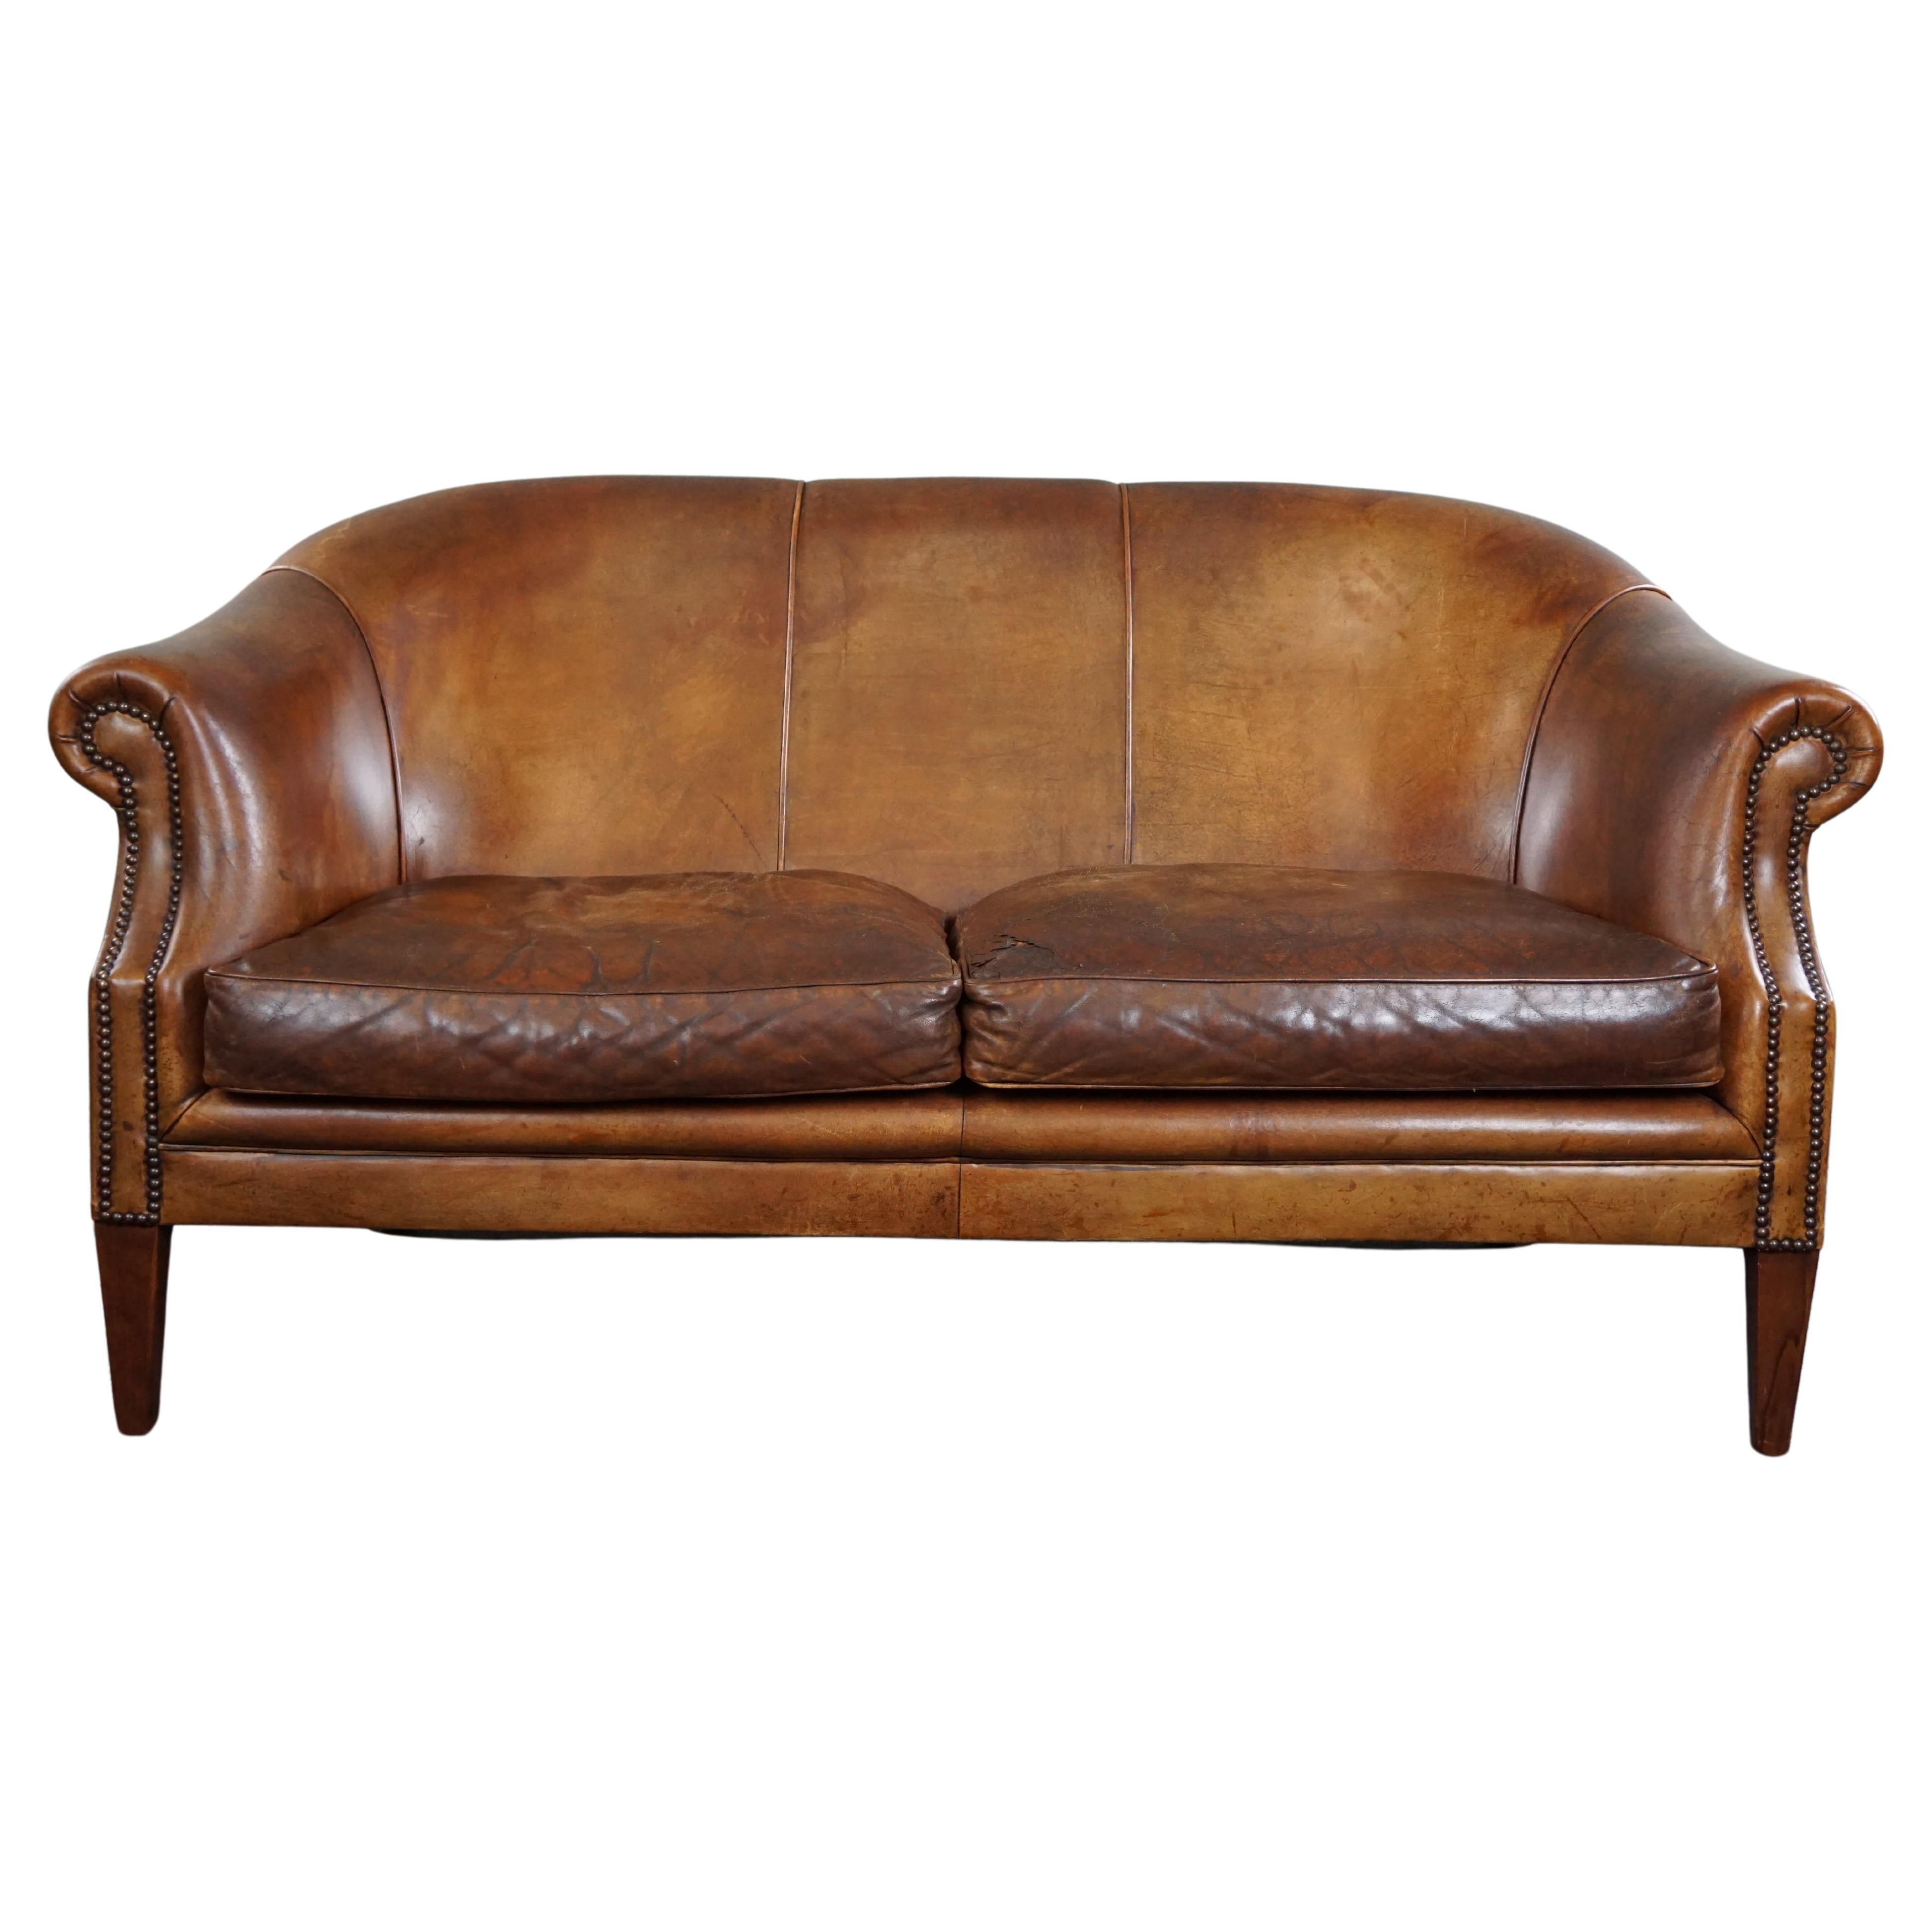 Super rugged vintage sheep leather 2-seater sofa in club style For Sale